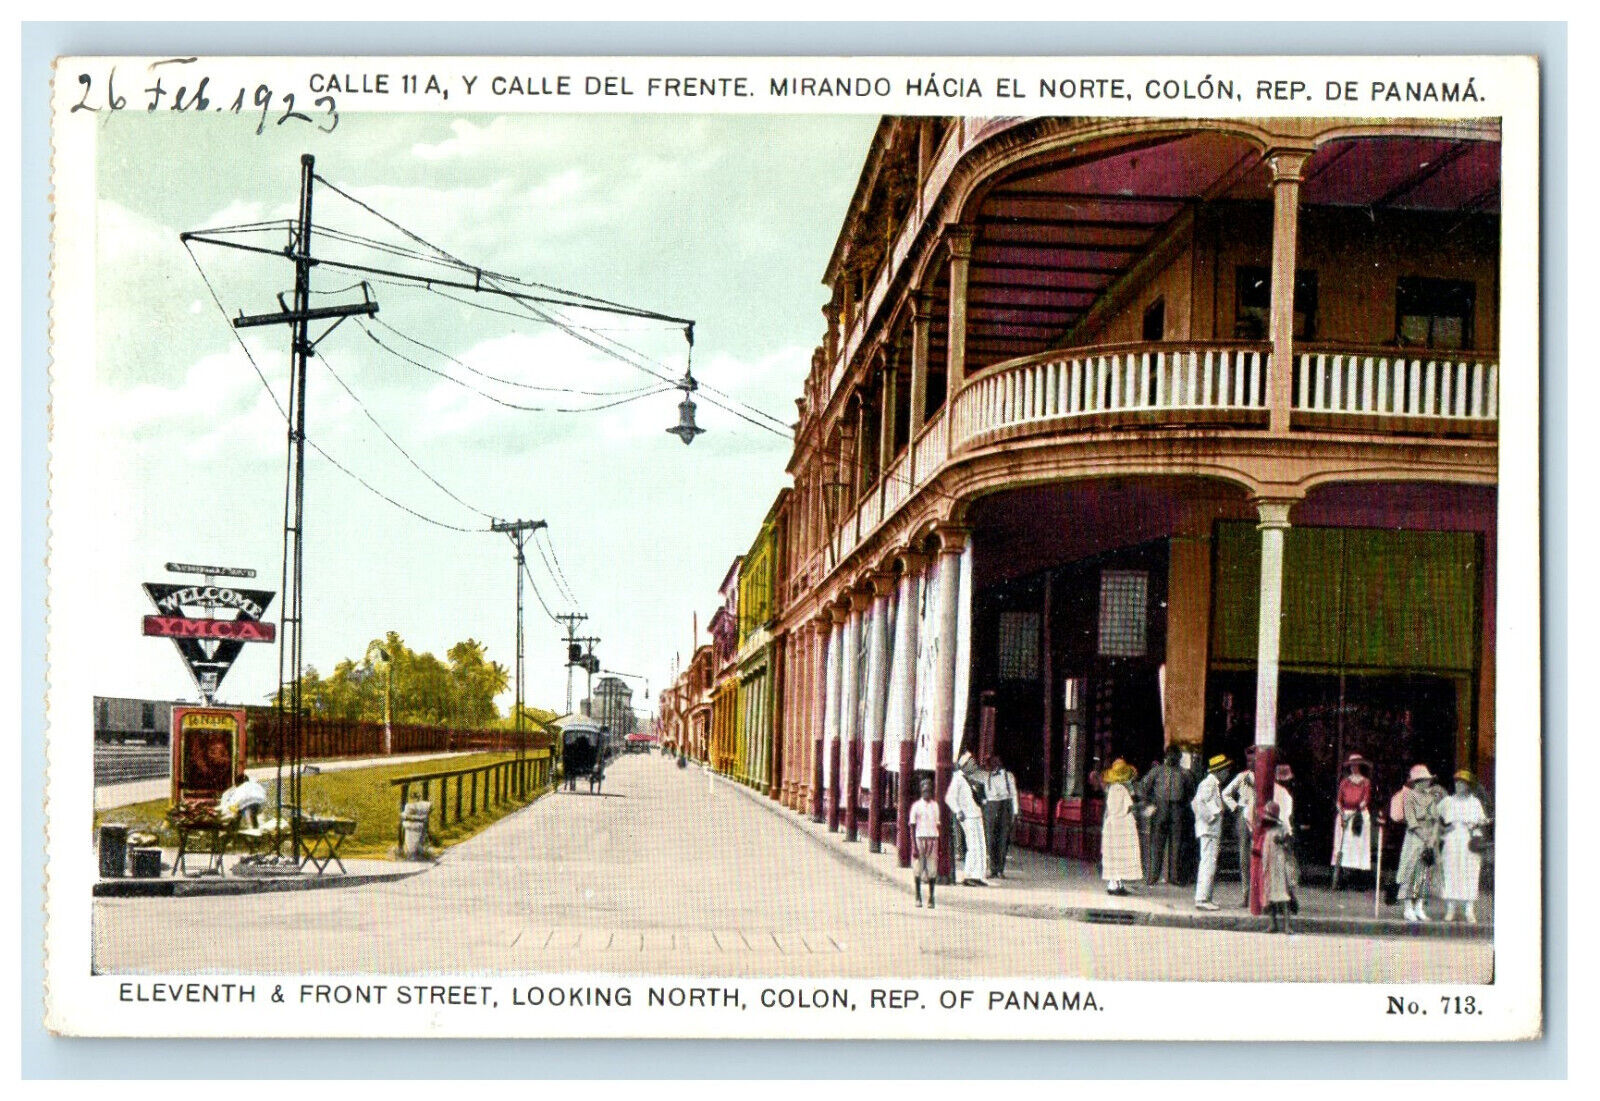 1923 Eleventh & Front Street Looking North Colon, Rep of Panama Postcard